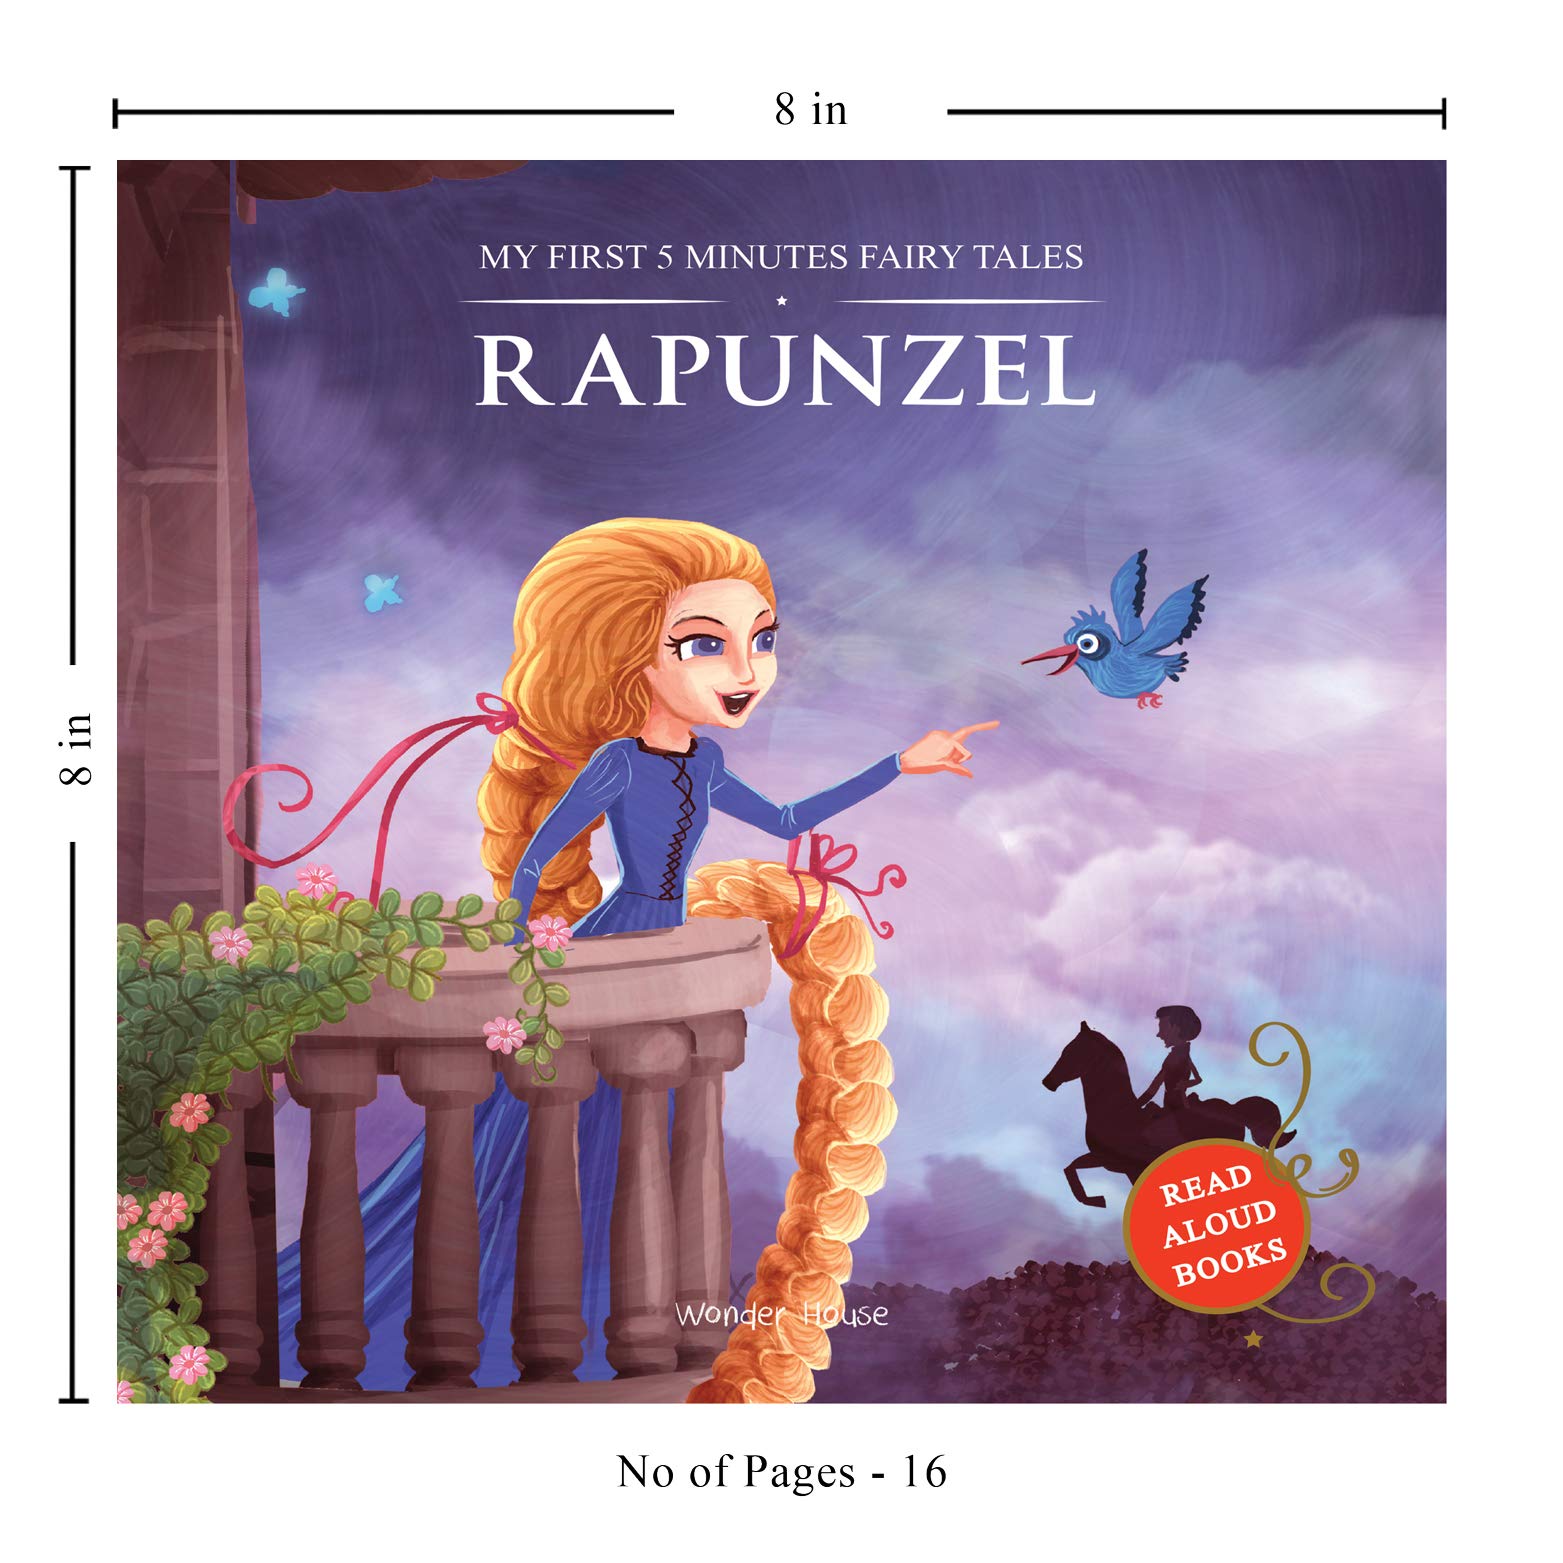 My First 5 Minutes Fairy Tales: Rapunzel